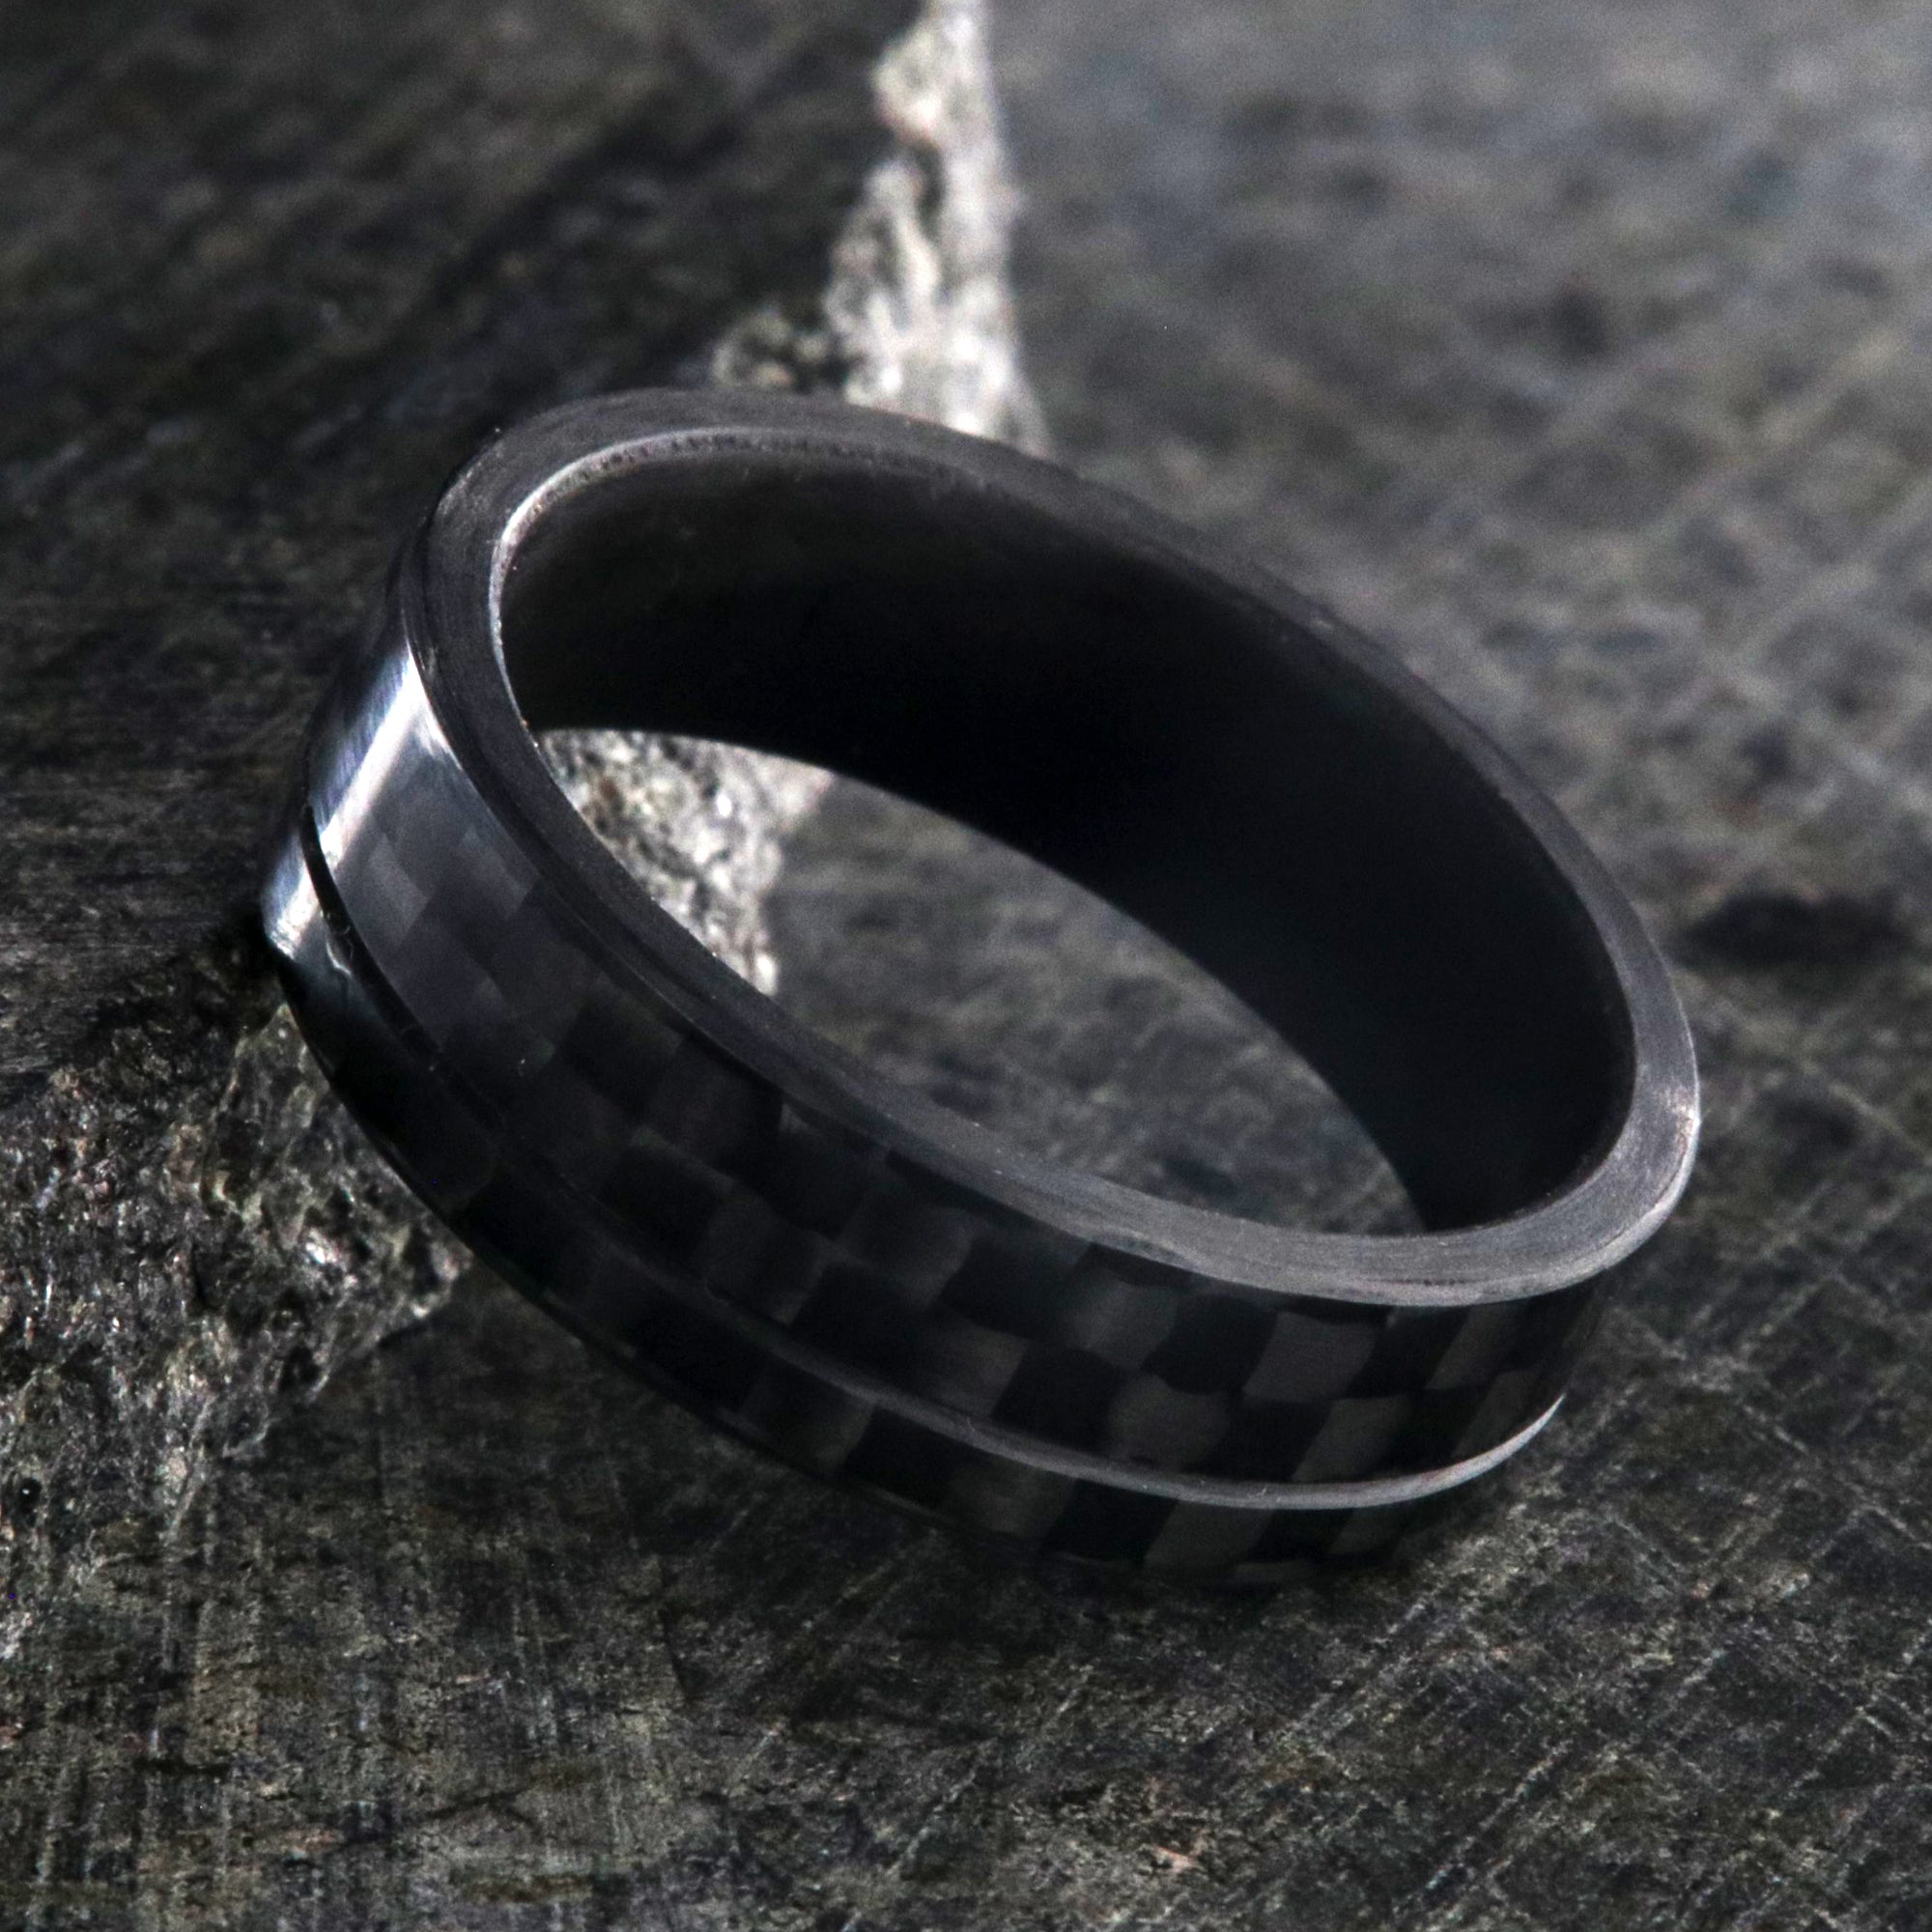 7mm wide black carbon fiber ring with an off-center groove and flat profile